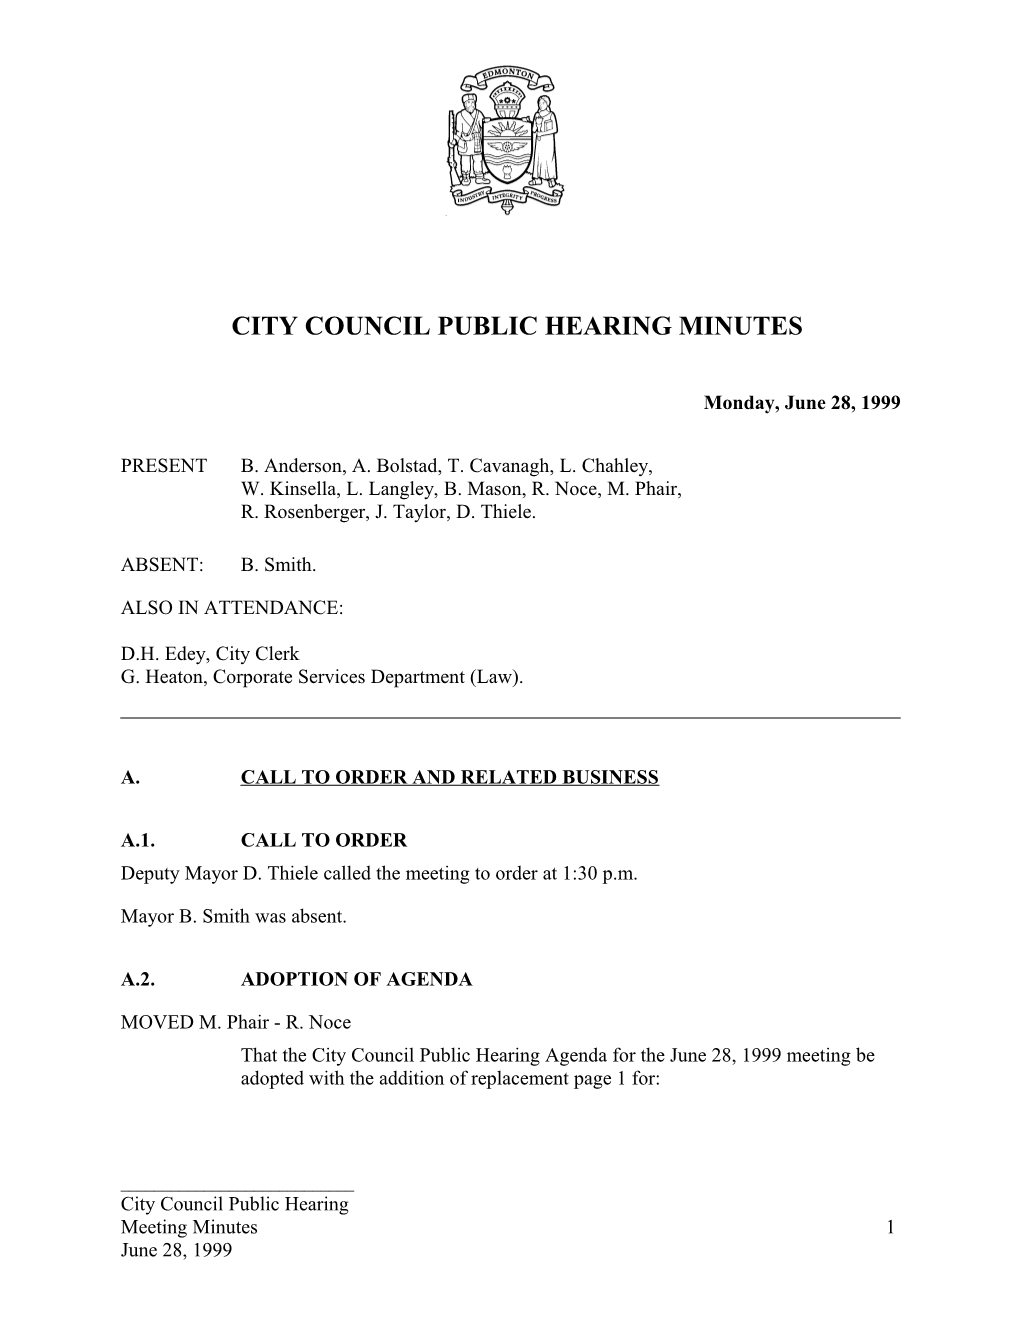 Minutes for City Council June 28, 1999 Meeting